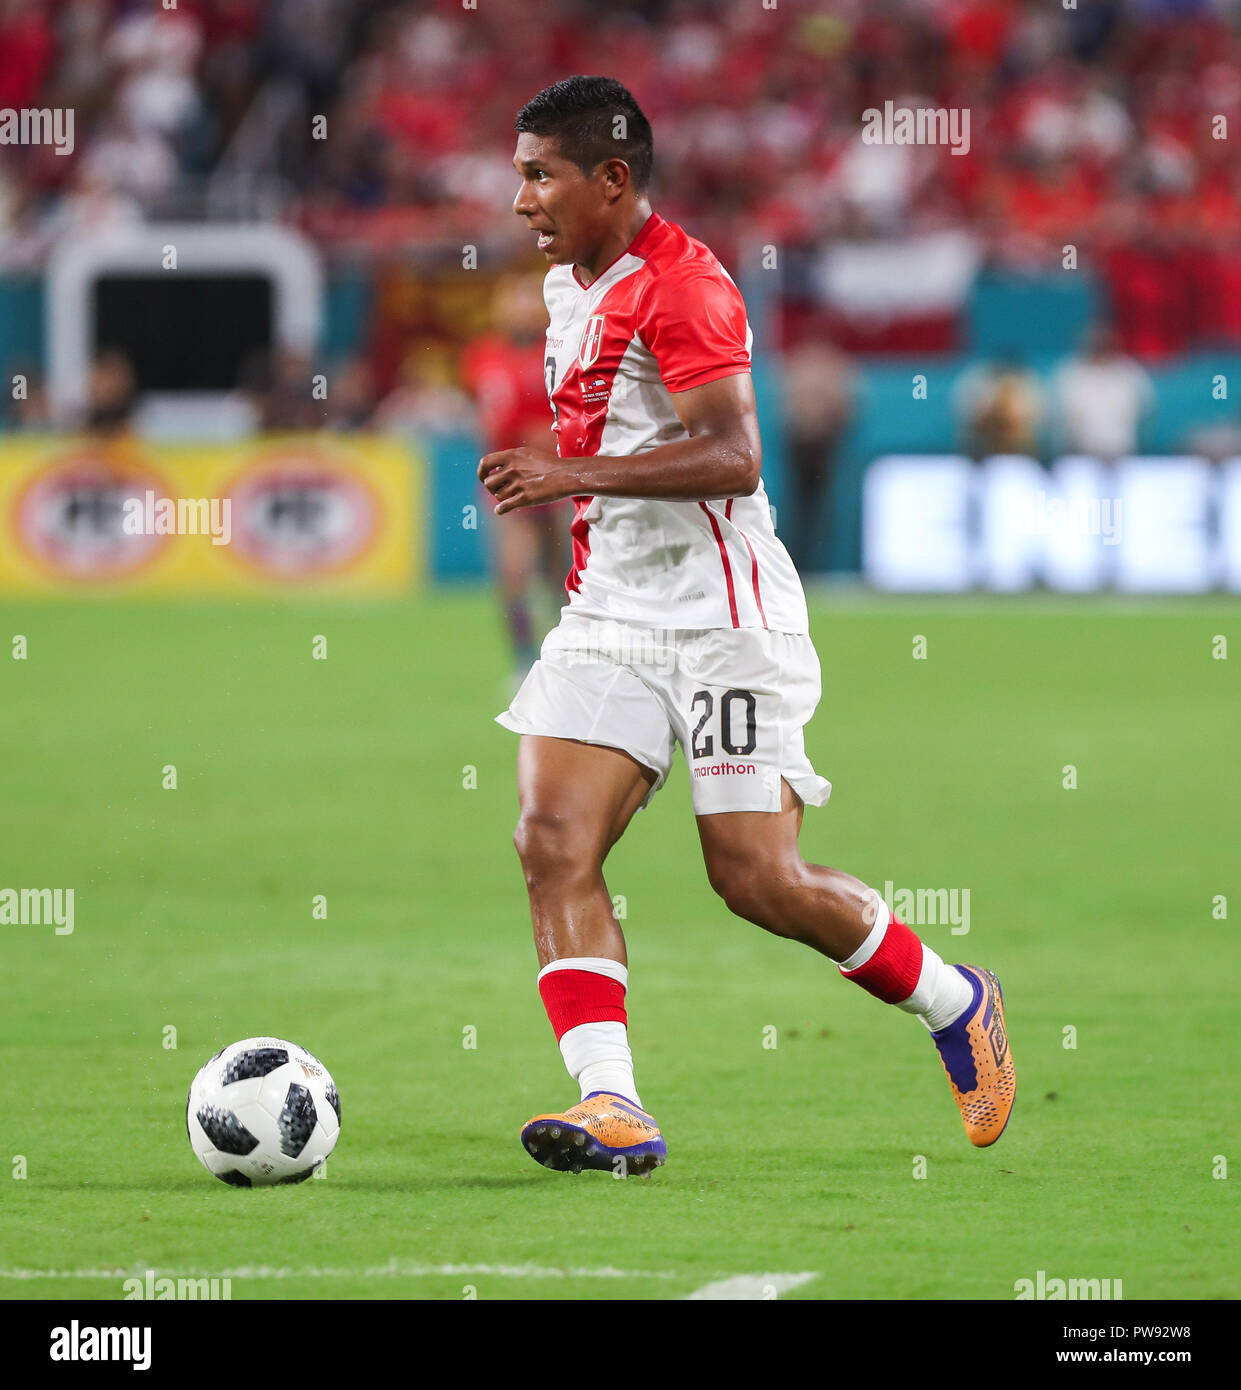 Miami Gardens, Florida, USA. 12th Oct, 2018. Peru midfielder EDISON FLORES (20) in action during an international friendly match between the Peru and Chile national soccer teams, at the Hard Rock Stadium in Miami Gardens, Florida. Credit: Mario Houben/ZUMA Wire/Alamy Live News Stock Photo